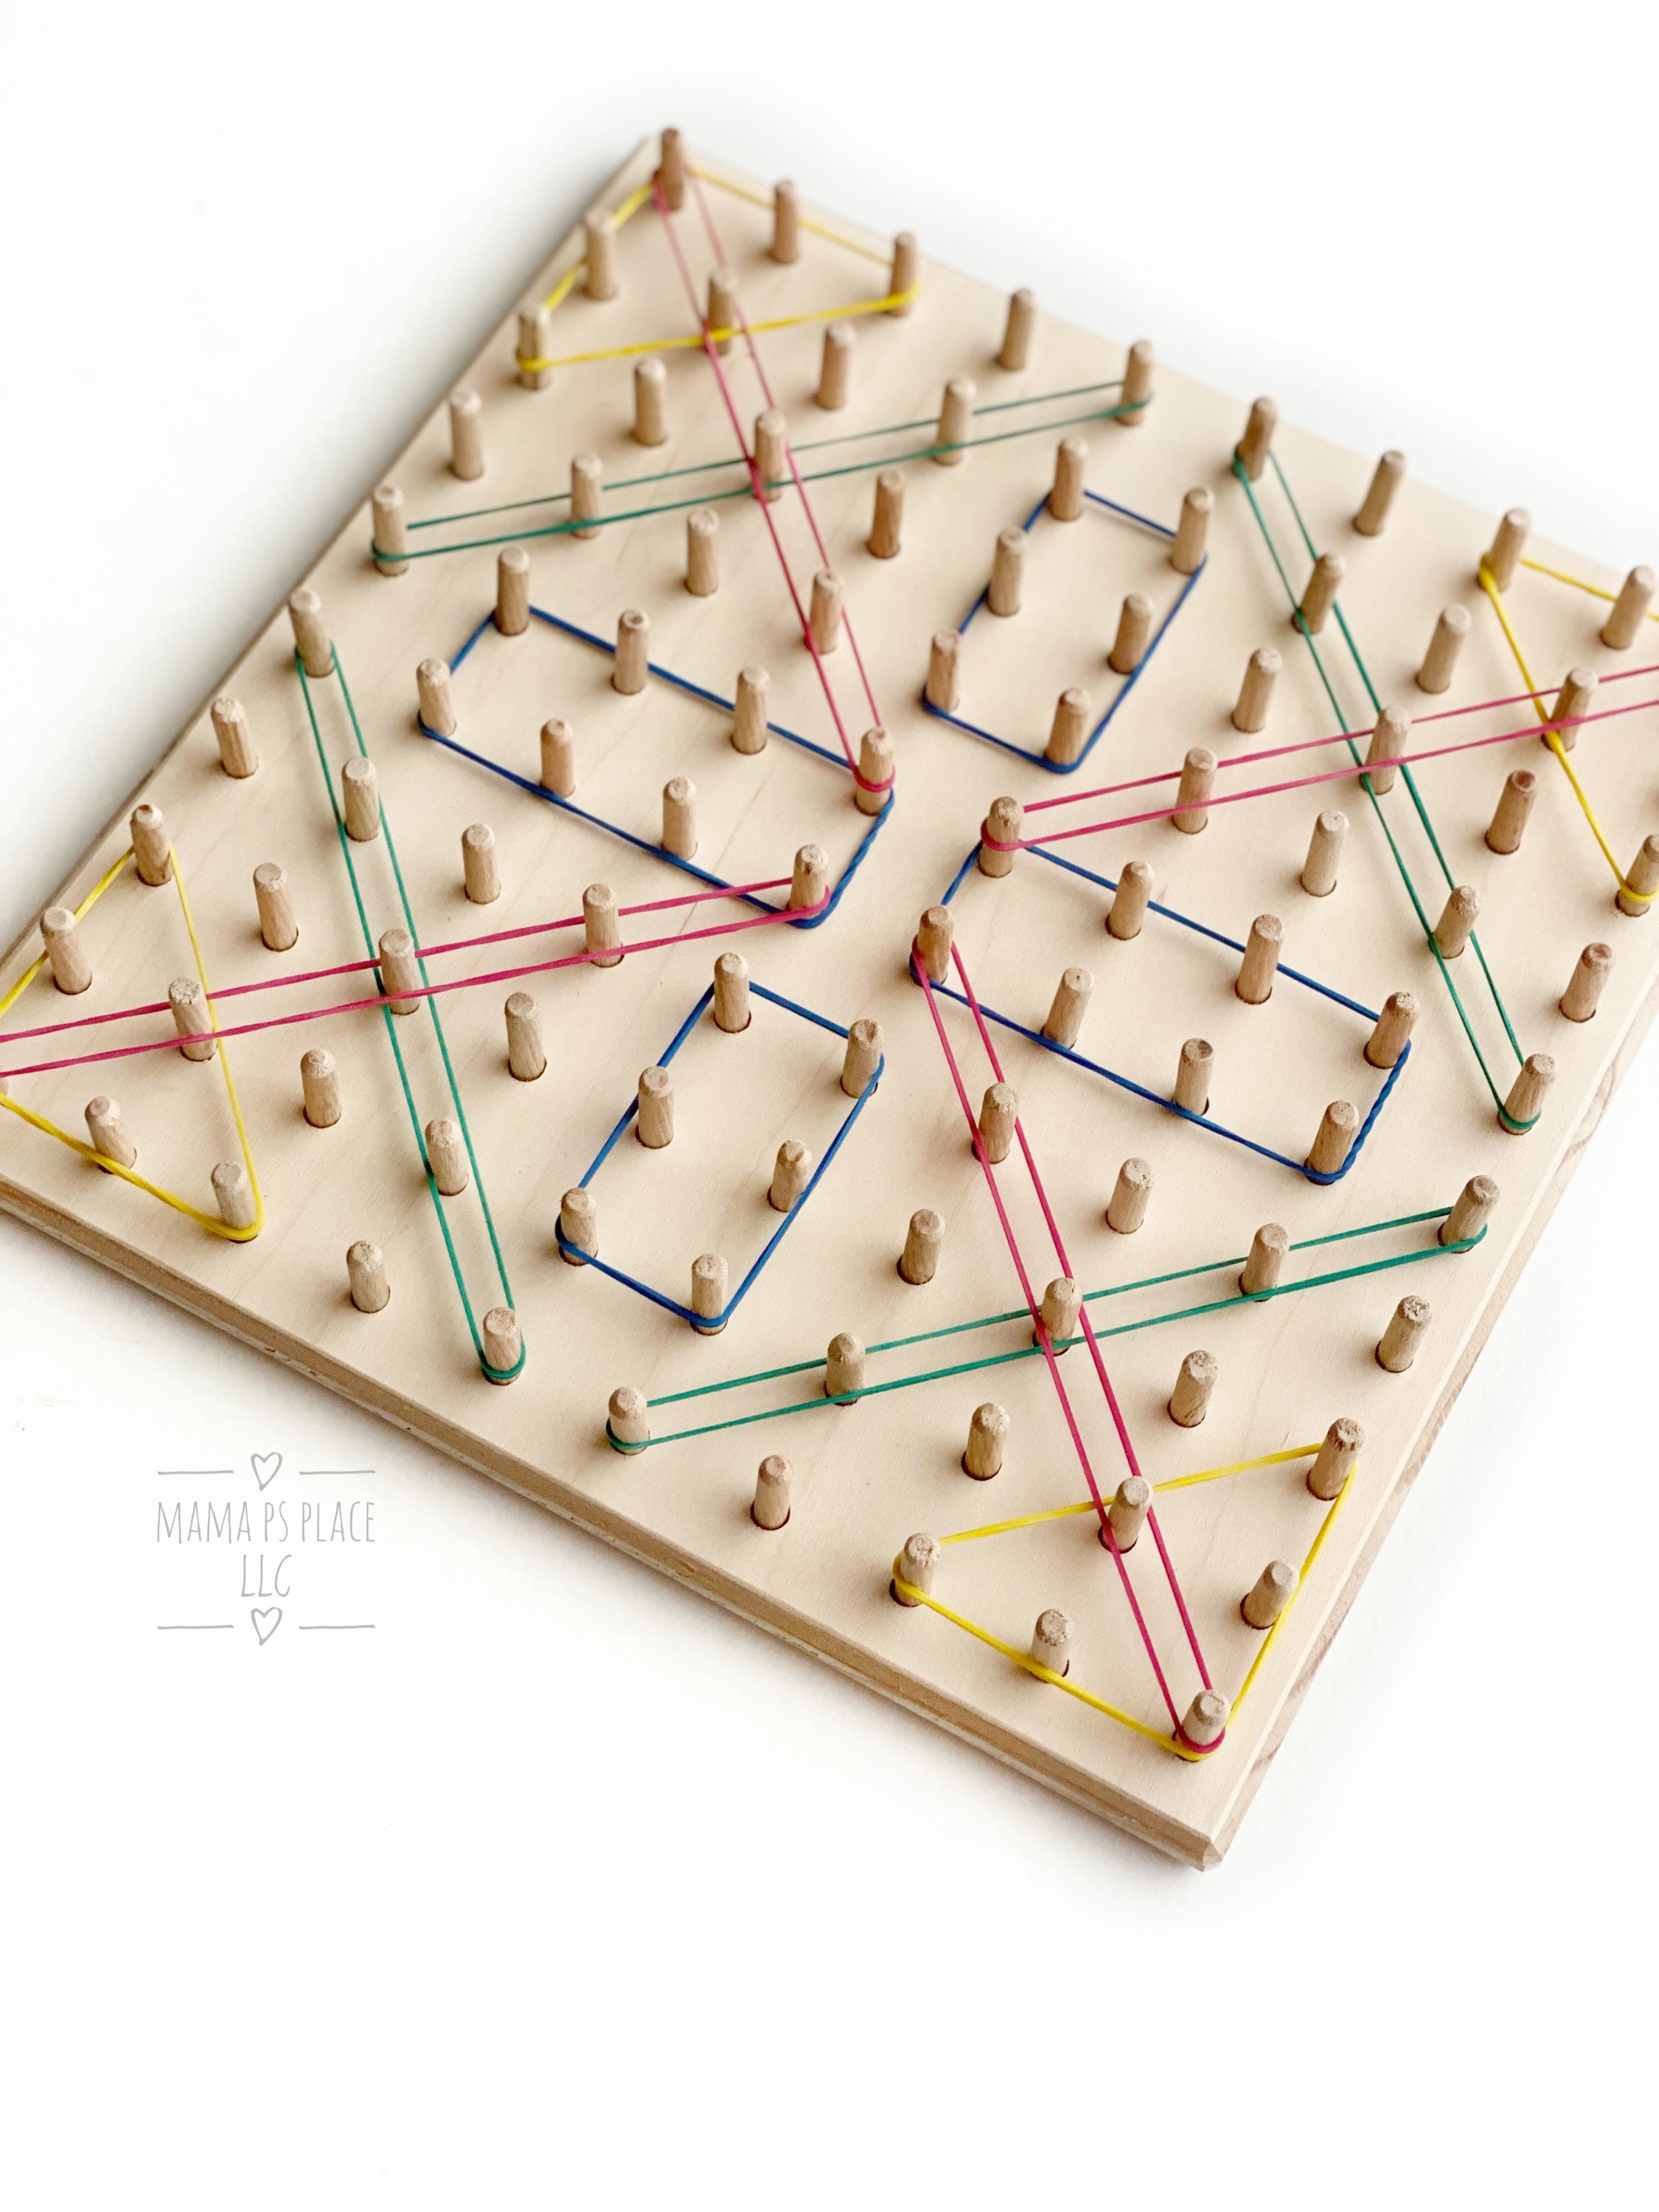 Geoboard Wood Wooden Geo Board Peg Metal Pins Graphing Busy Board  Montessori Waldorf Toys Toddler Christmas Gift Learning Game 